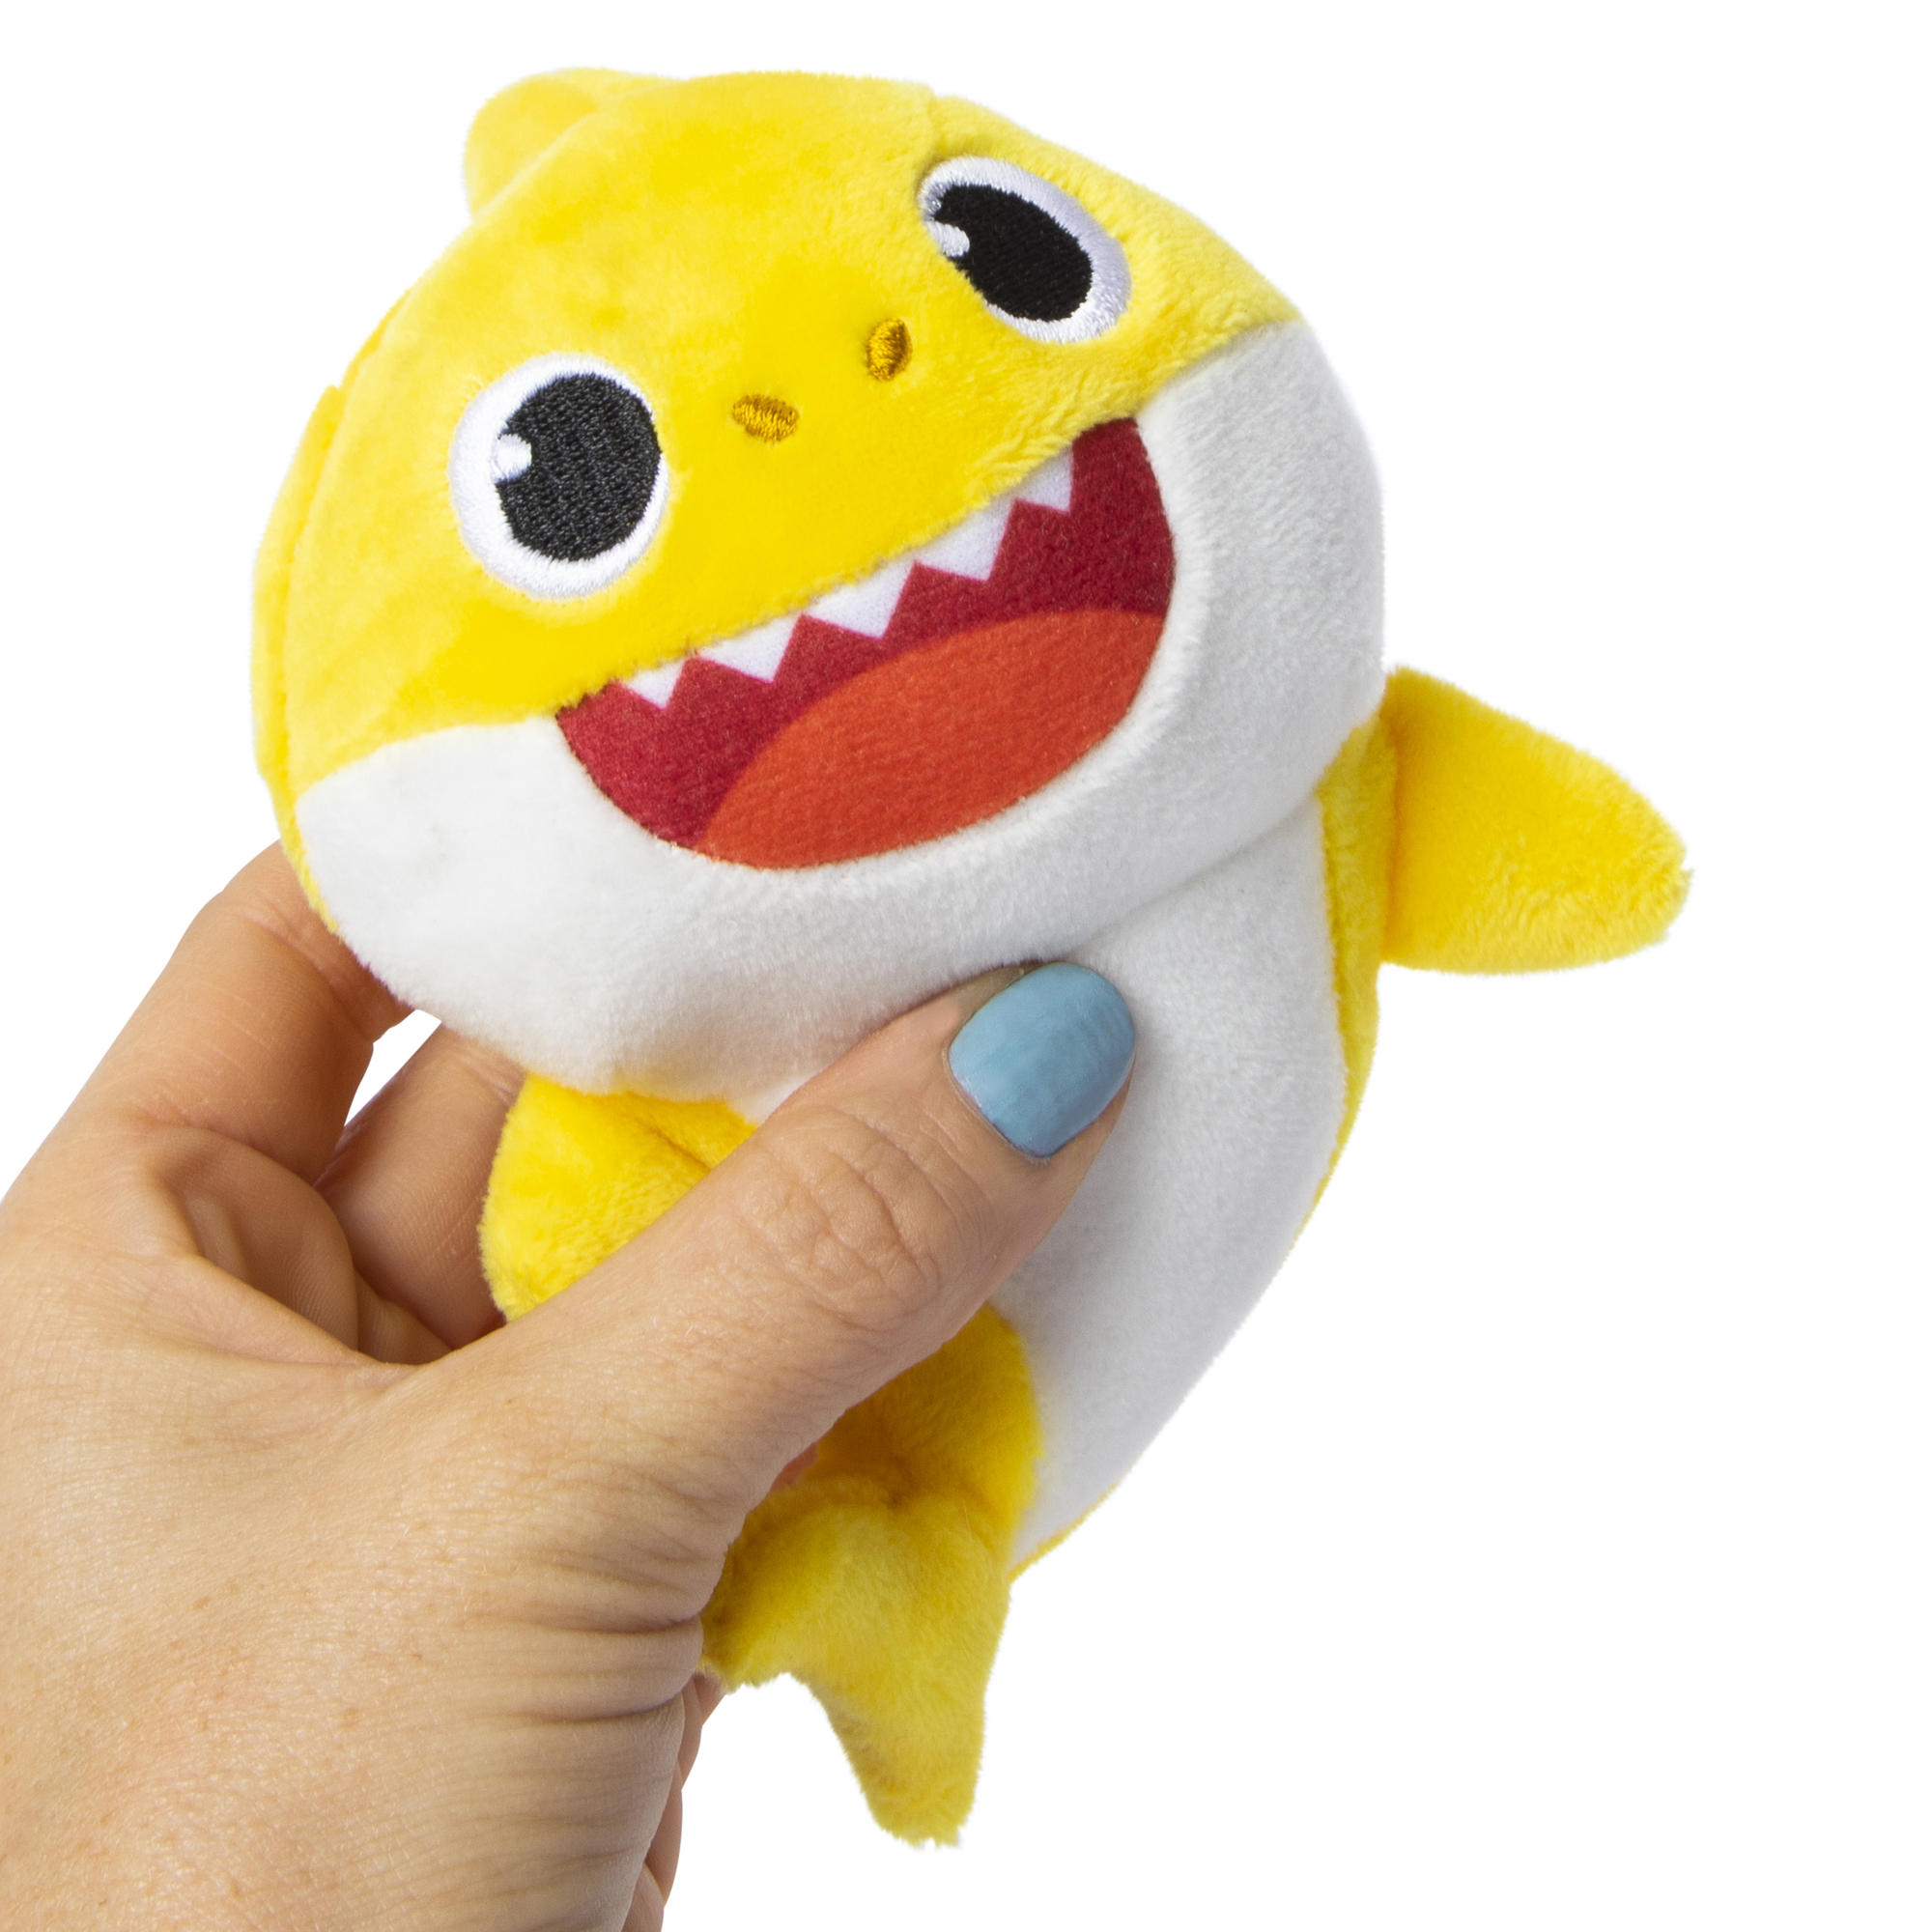 Nickelodeon Baby Shark Holiday Large Plush Daddy Shark Stuffed Animal,  Yellow, Kids Toys for Ages 3 Up, Gifts and Presents